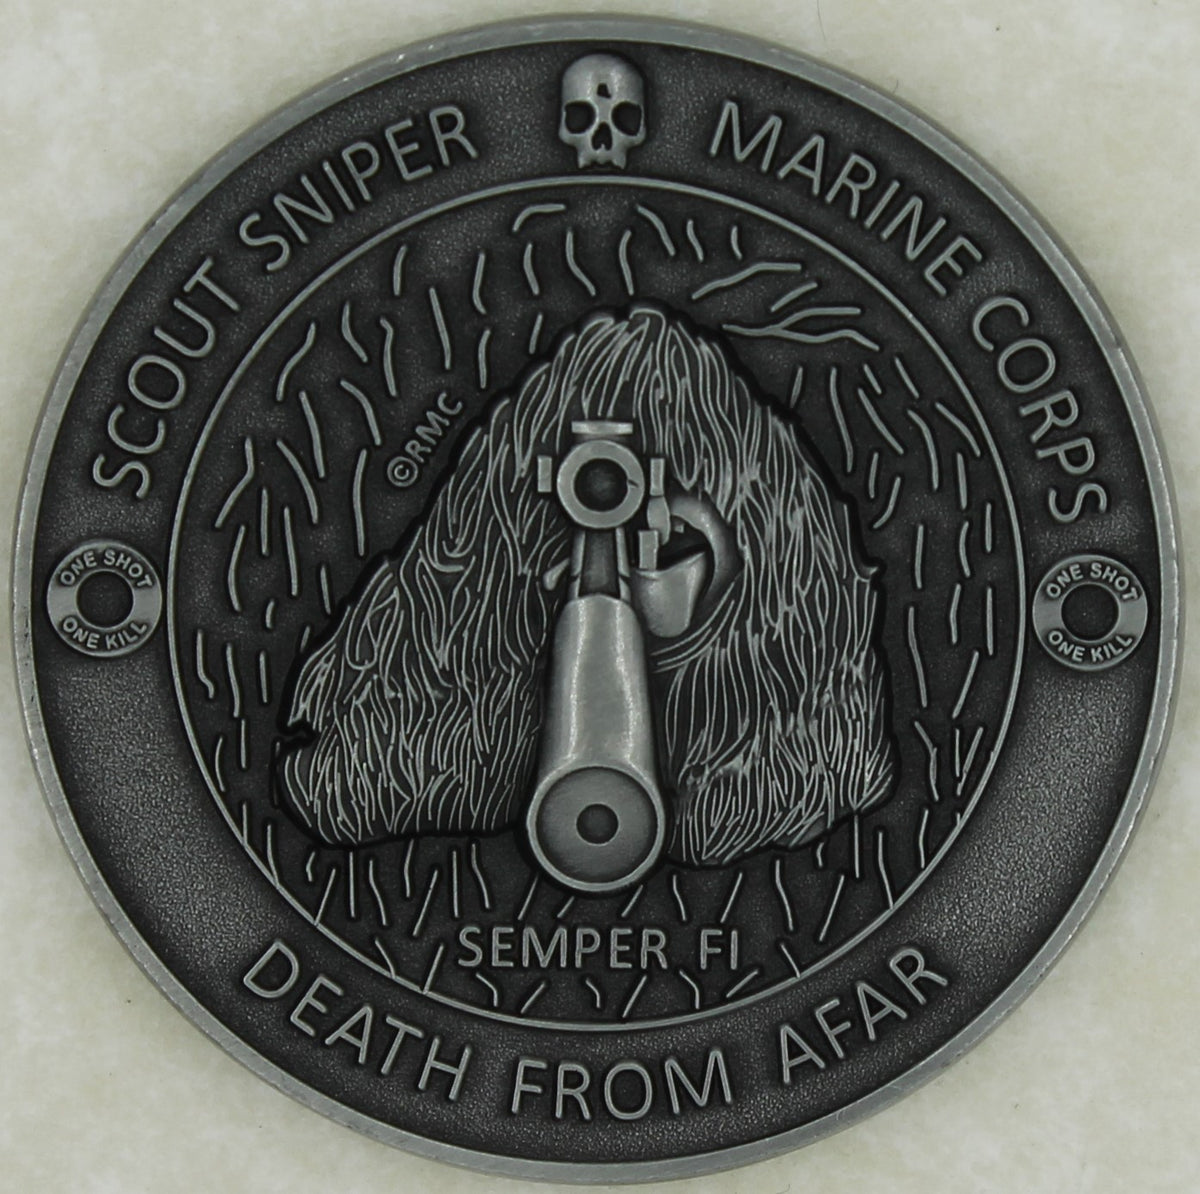 Marine Corps Scout Sniper MOS 8541/0311 This Dog Hunts! Marine Challen ...